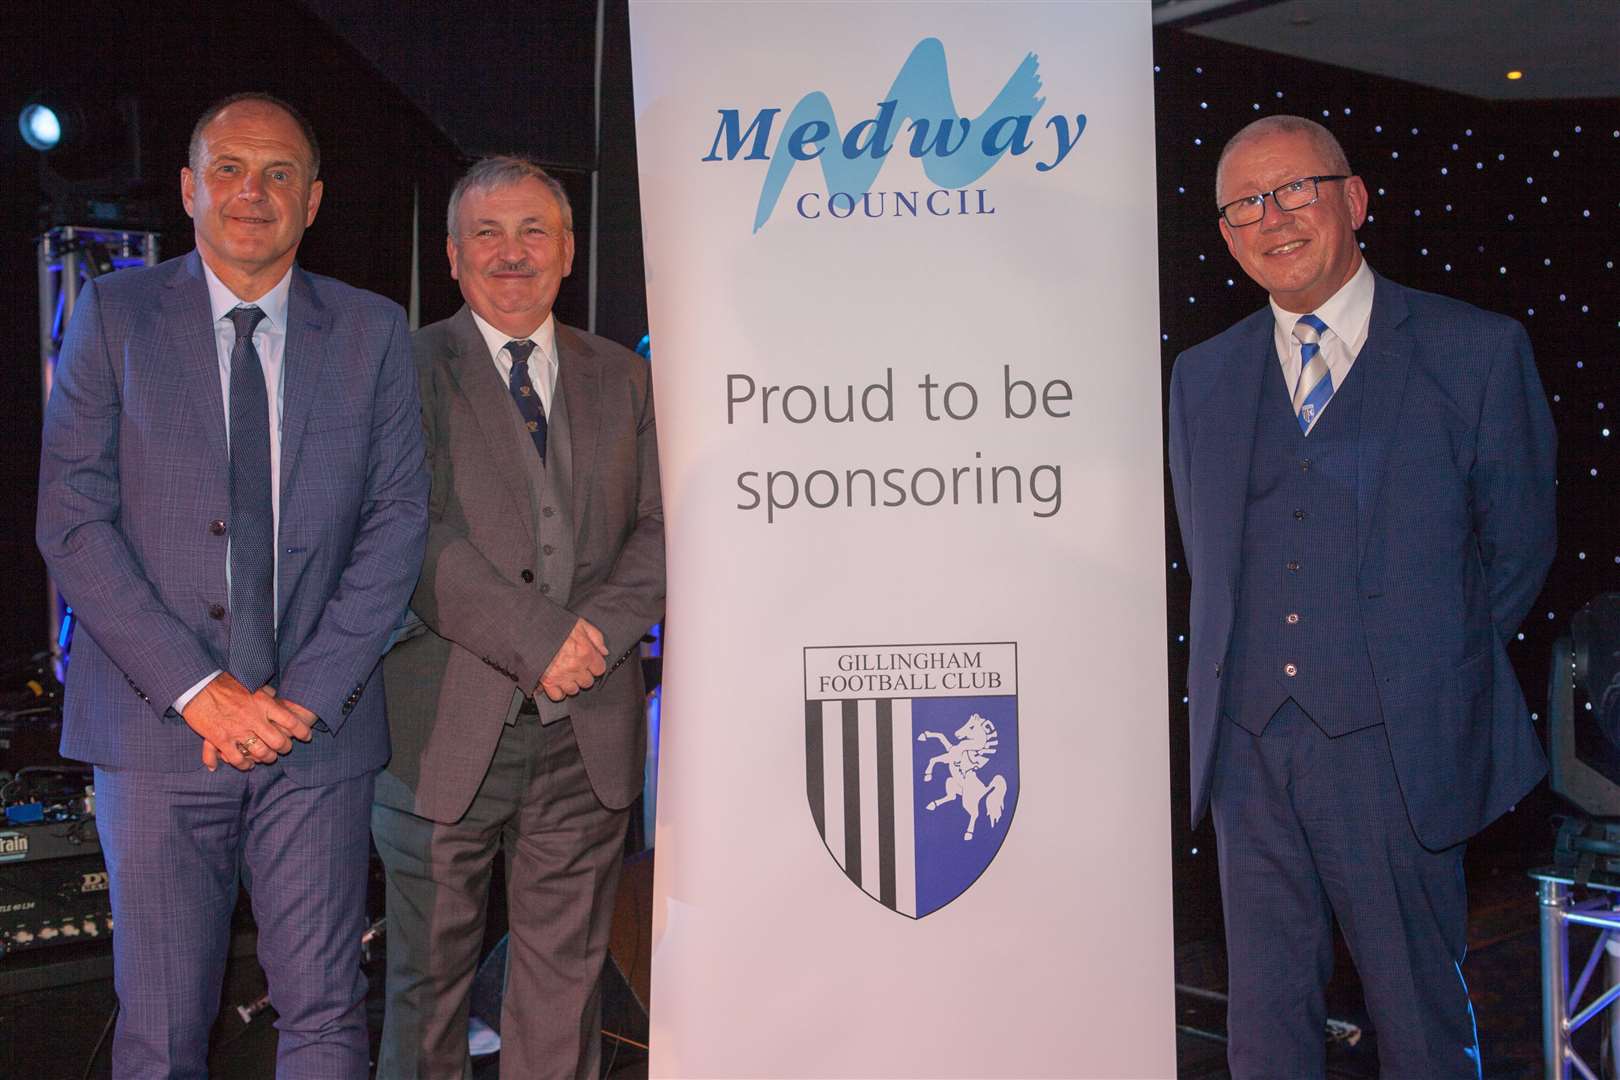 Gillingham FC announced a sponsorship deal with Medway Council. Credit:Kent Pro Images